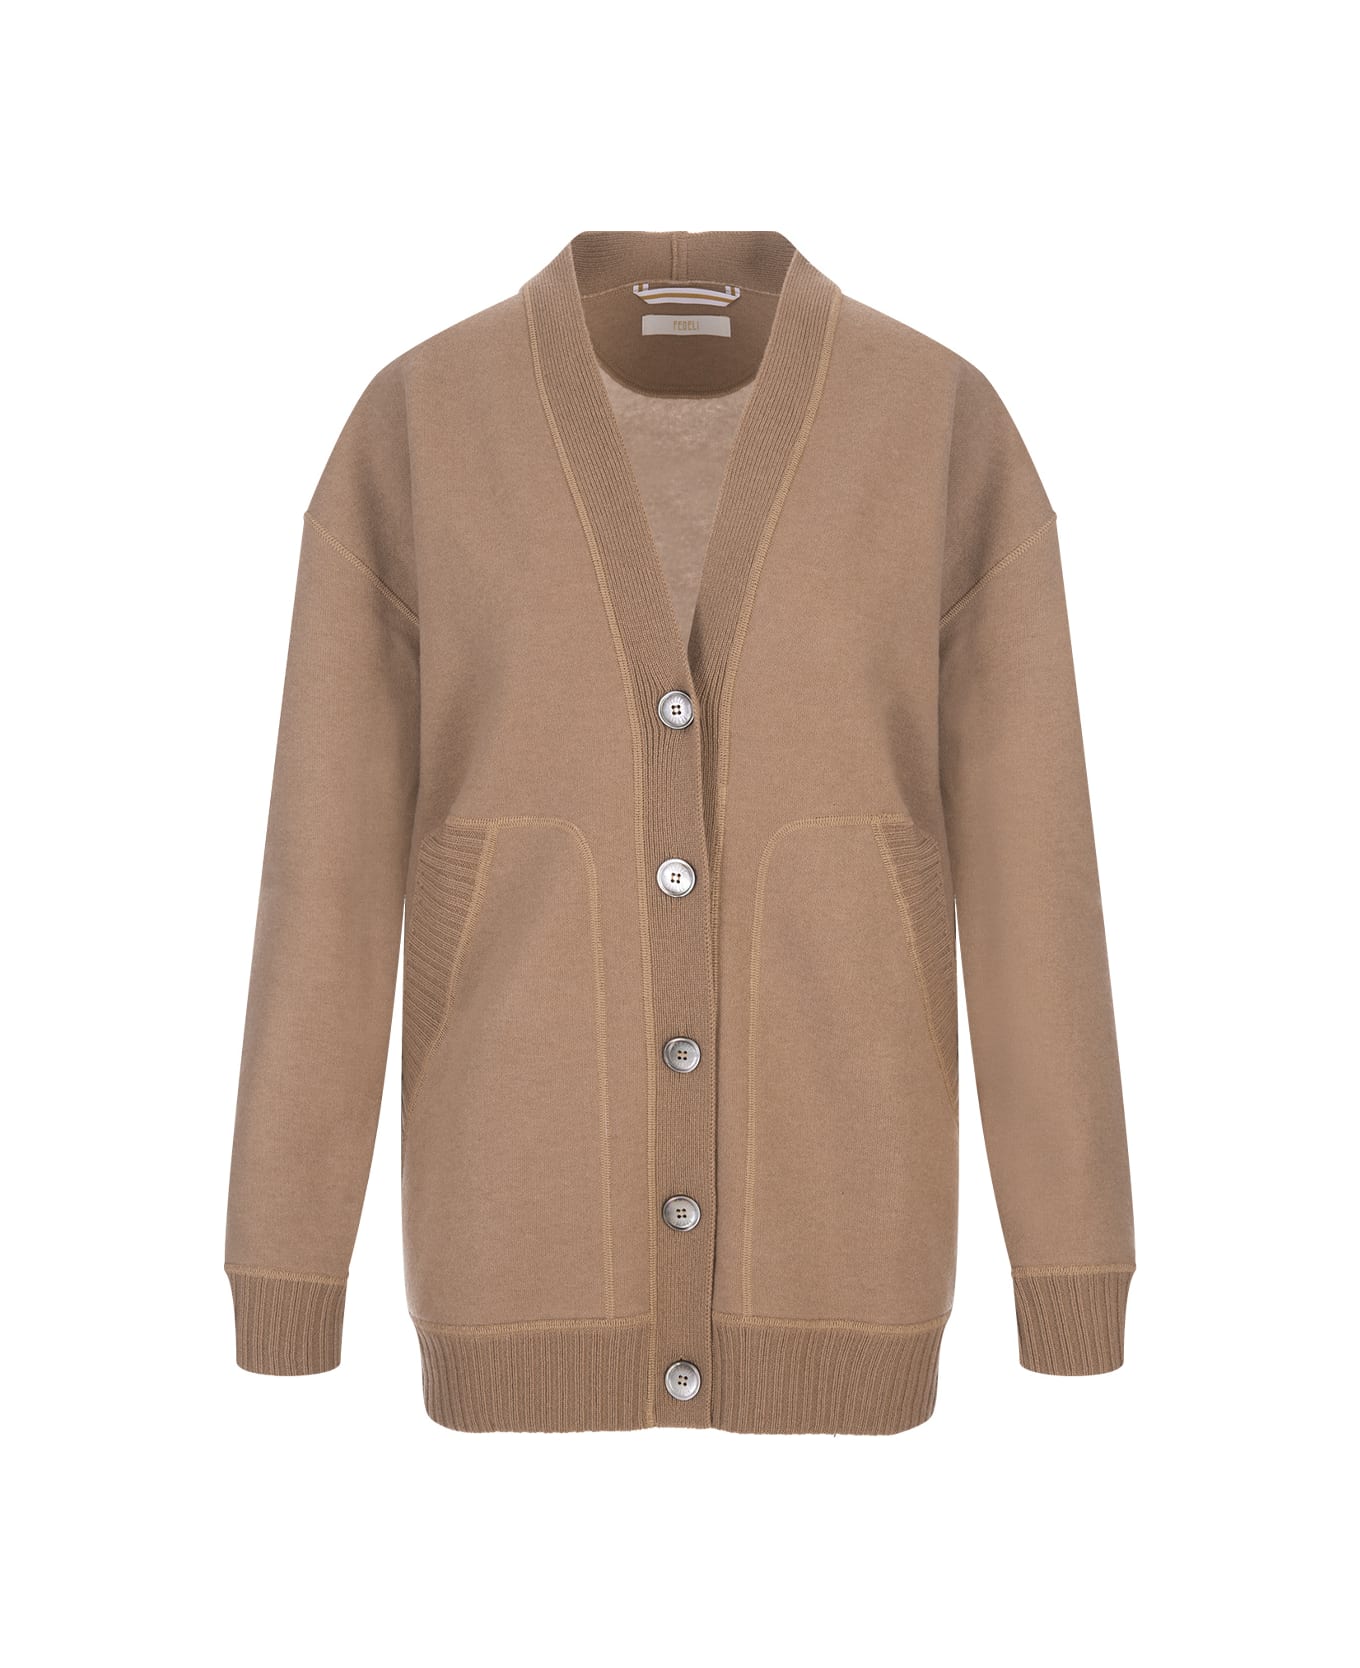 Fedeli Maxi Cardigan With Buttons In Camel Cashmere - Brown カーディガン